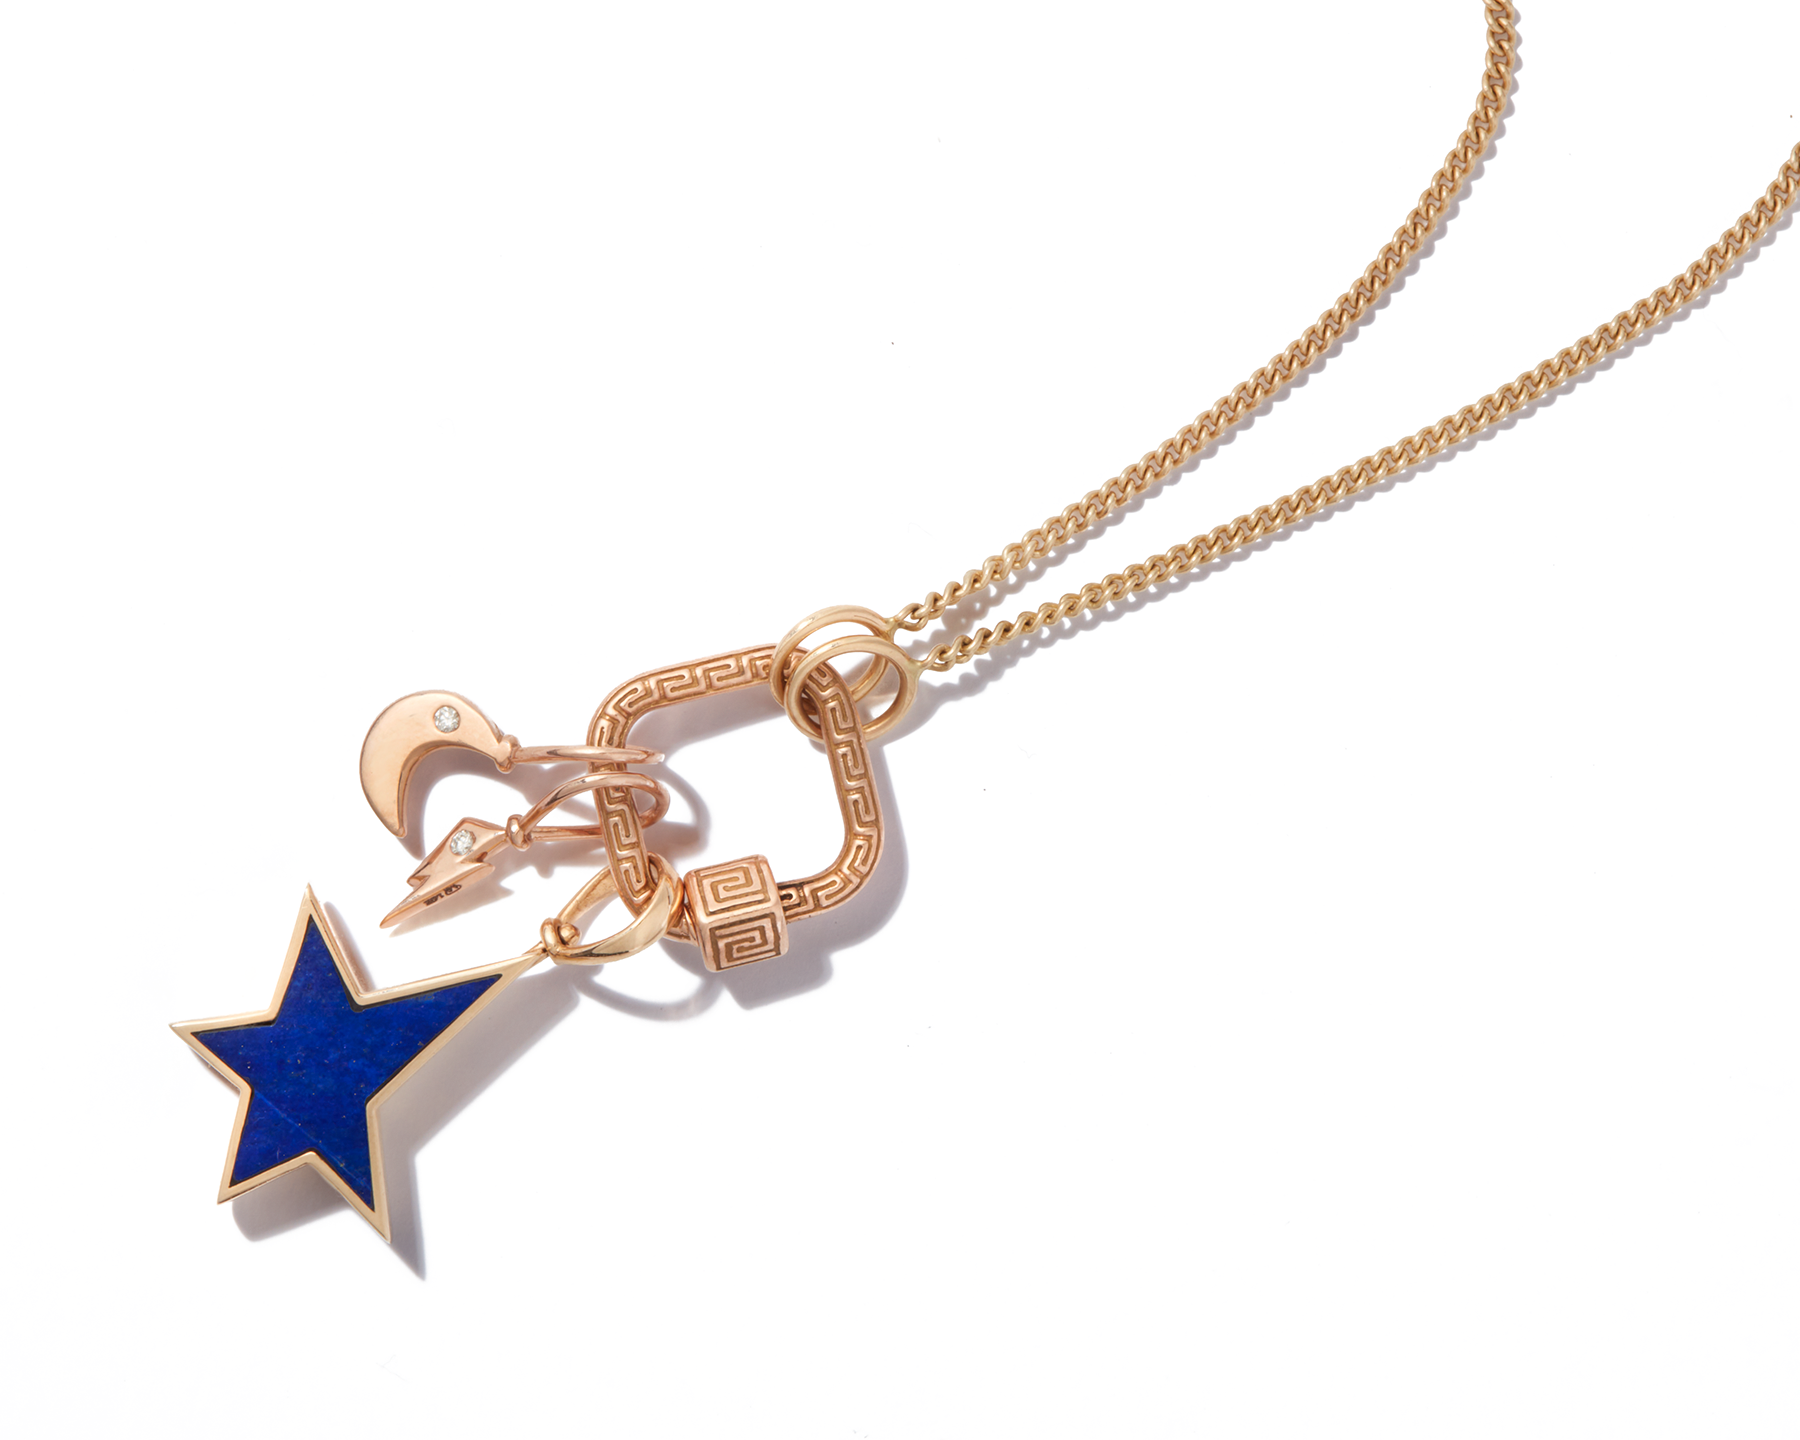 Close up of fine chain gold necklace with blue star charm